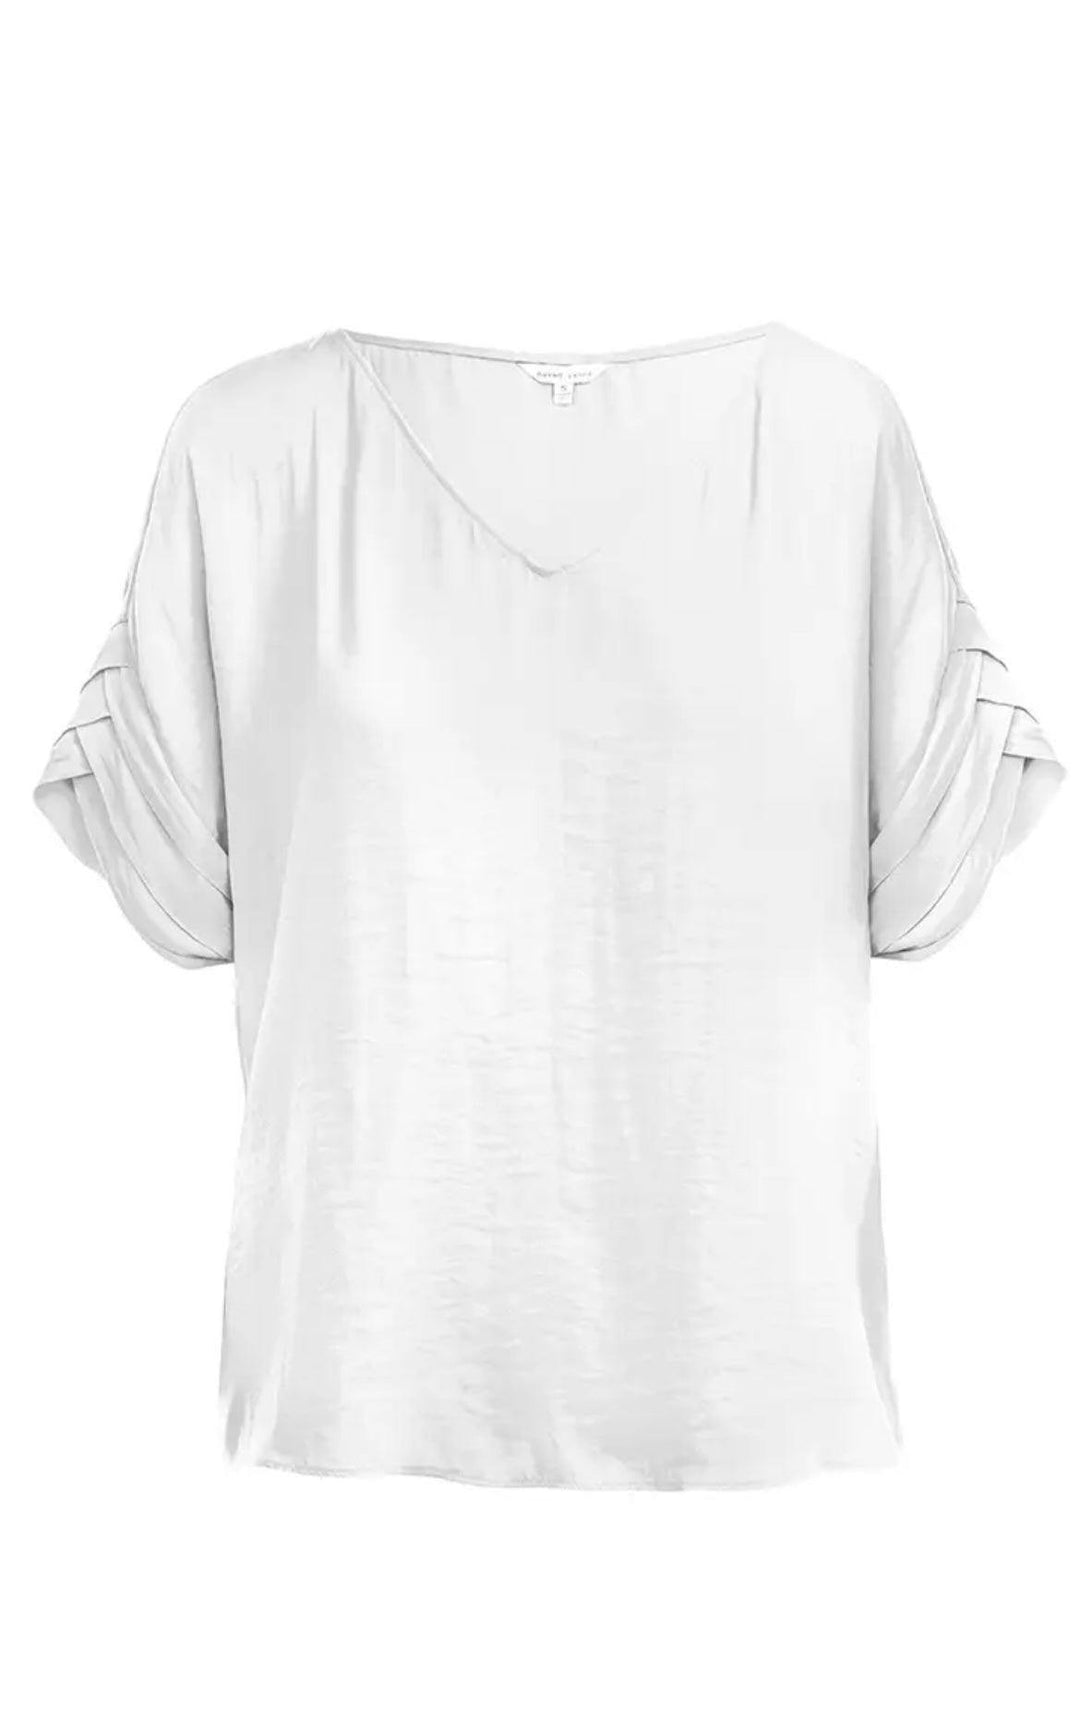 white silky basic top- tres chic